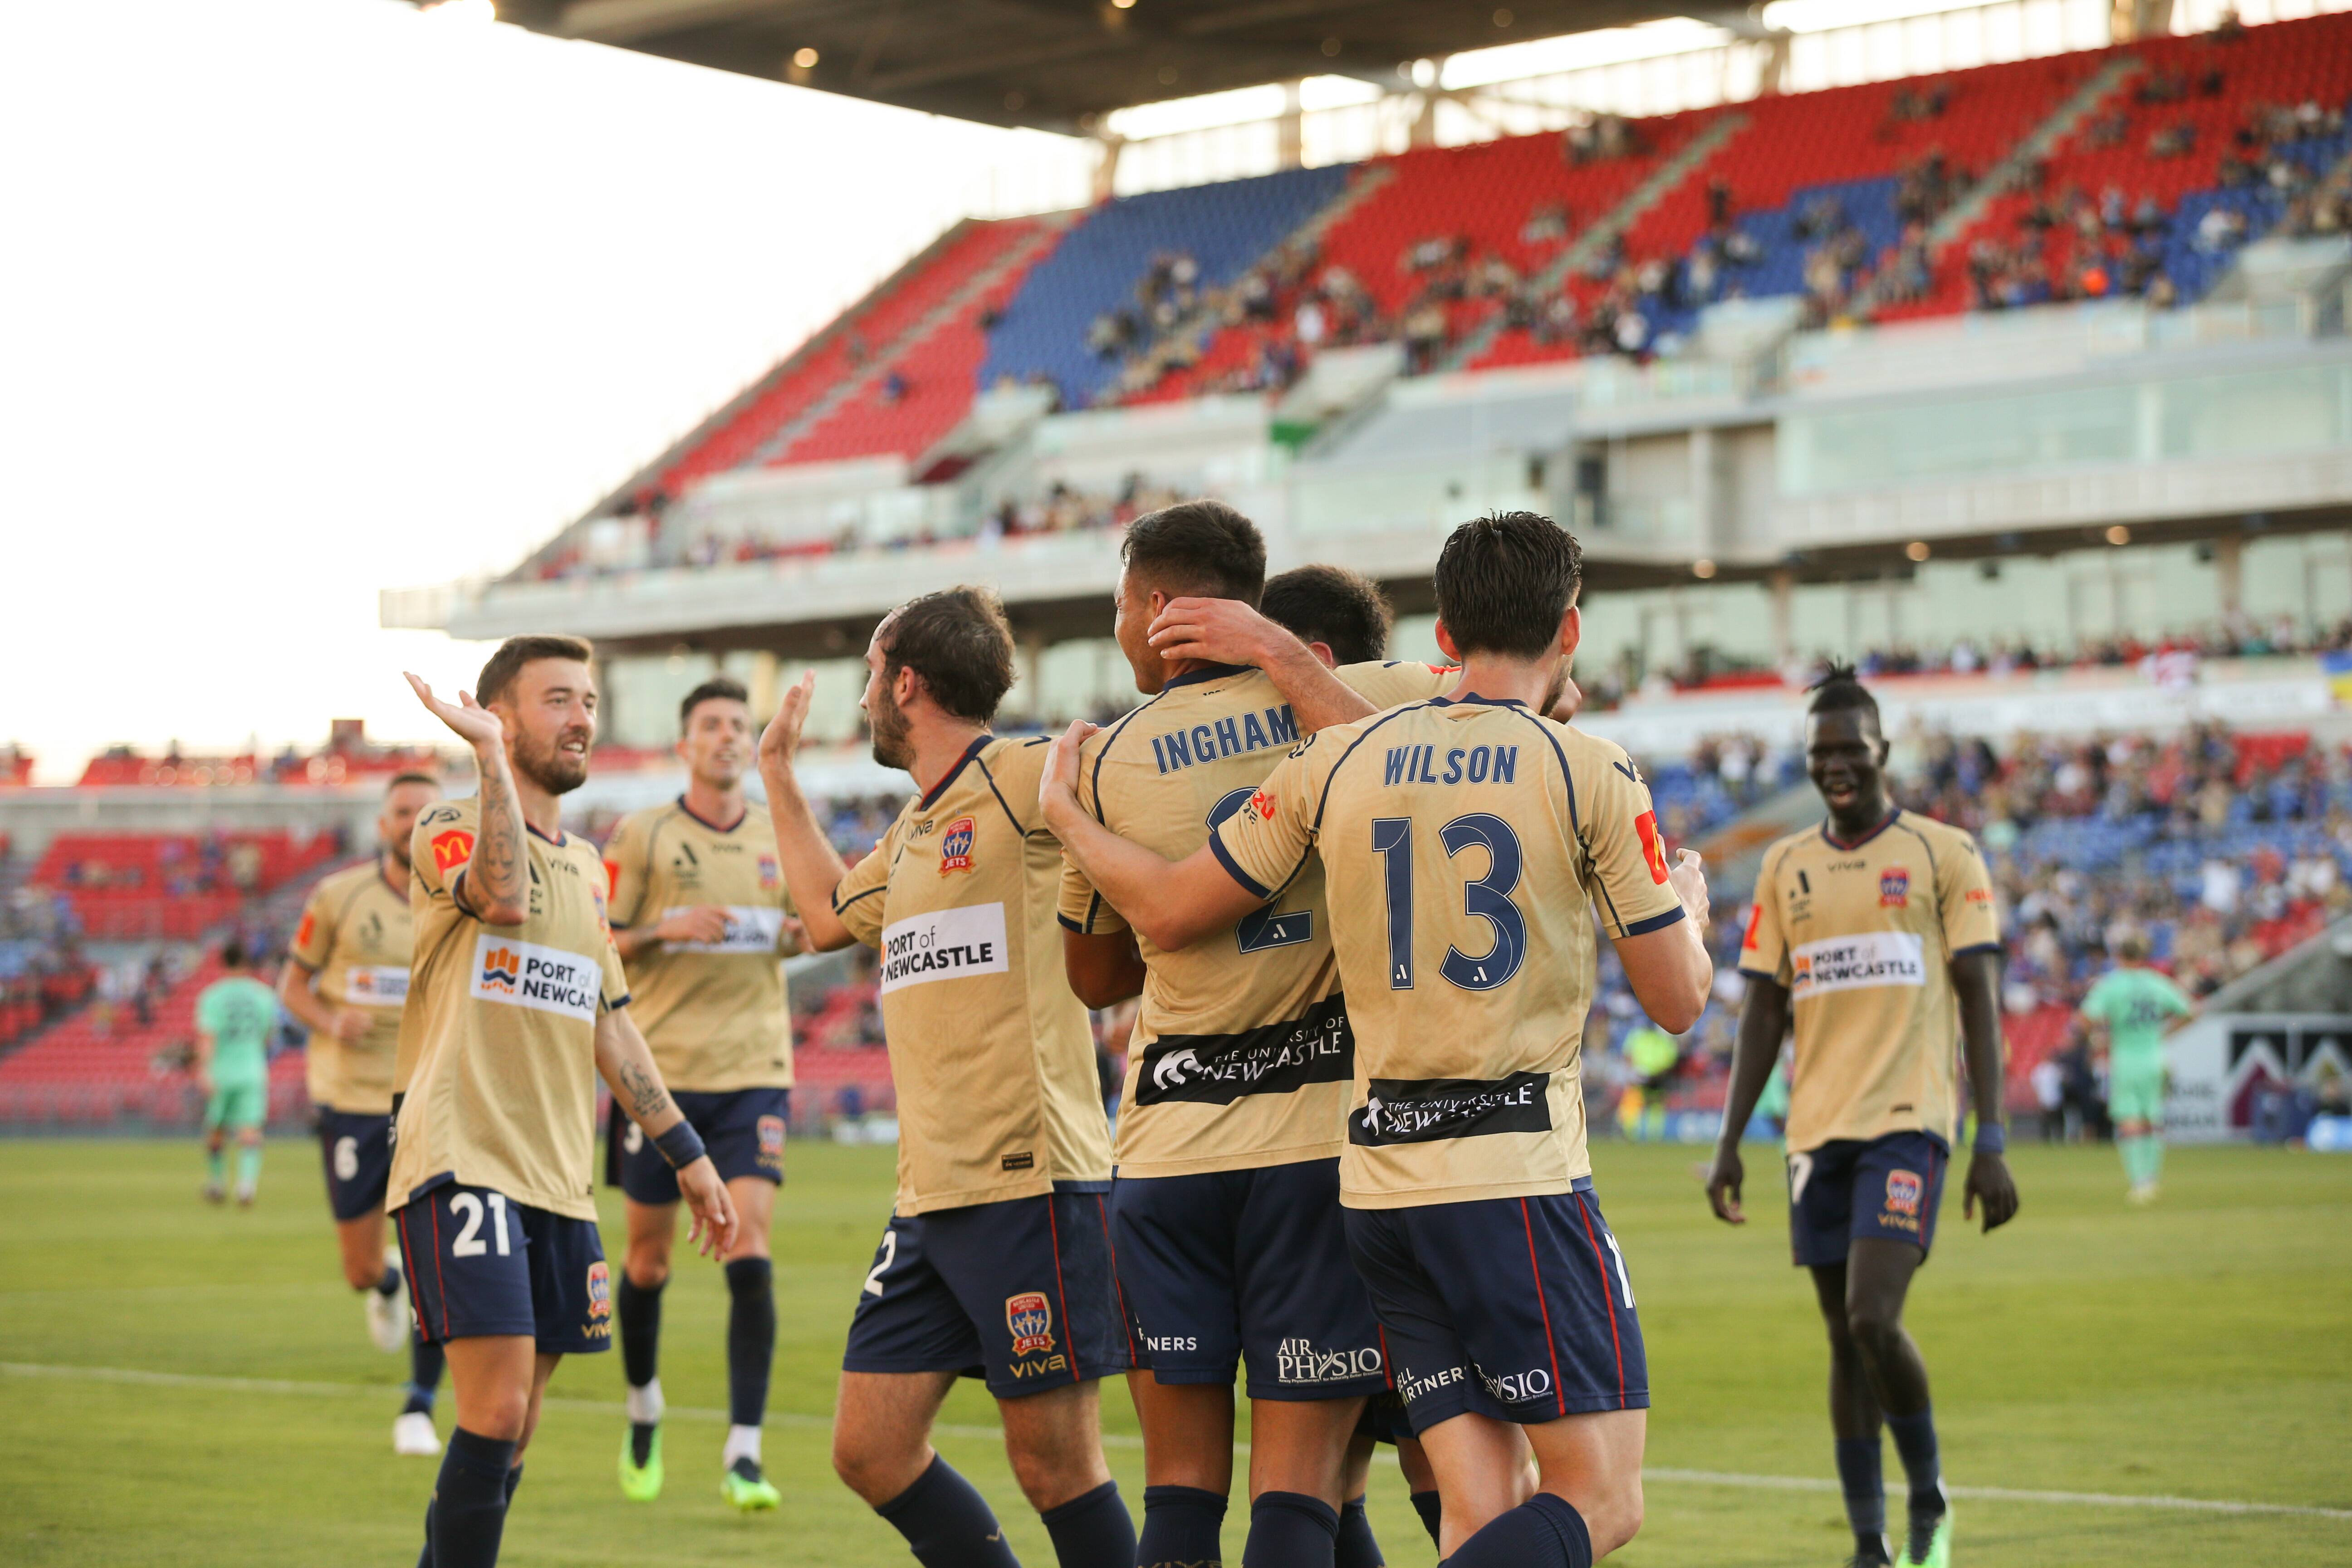 Central Coast Mariners vs Newcastle Jets, A-League F3 Derby preview